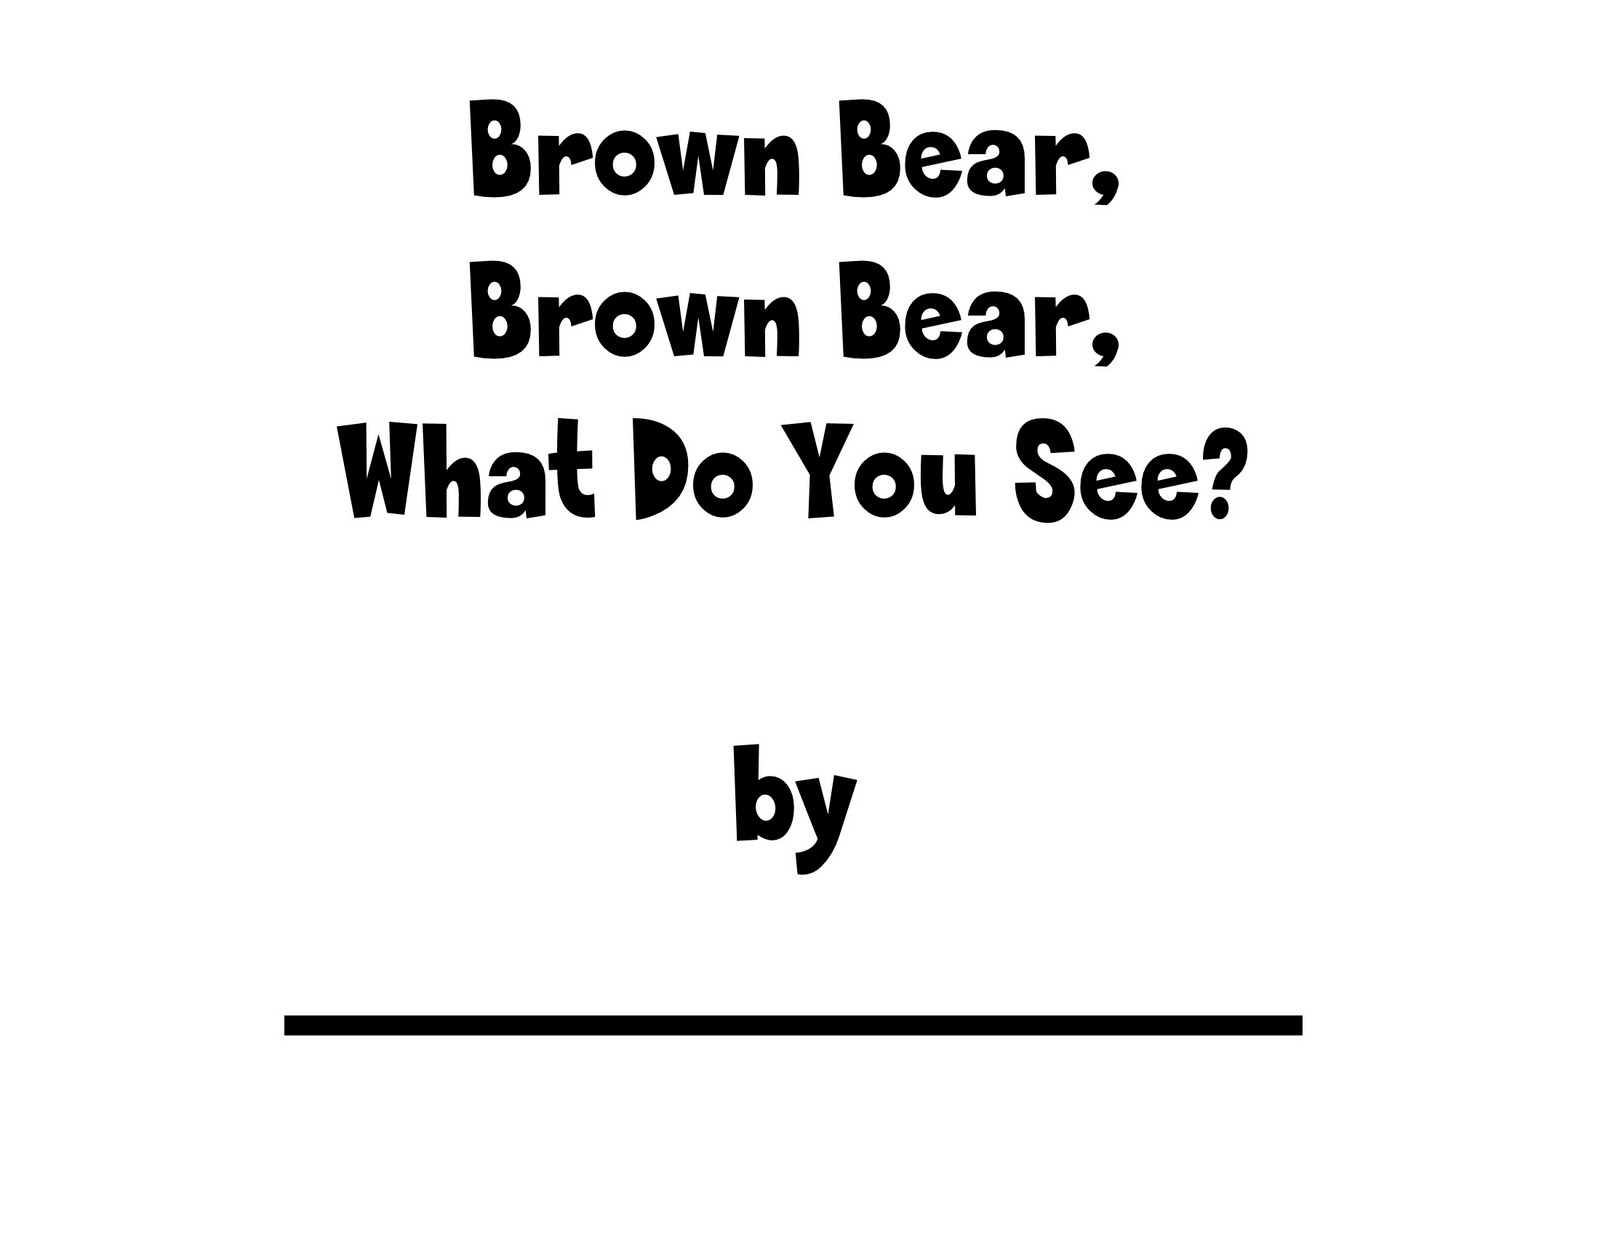 Brown Bear Brown Bear What Do You See Coloring Pages